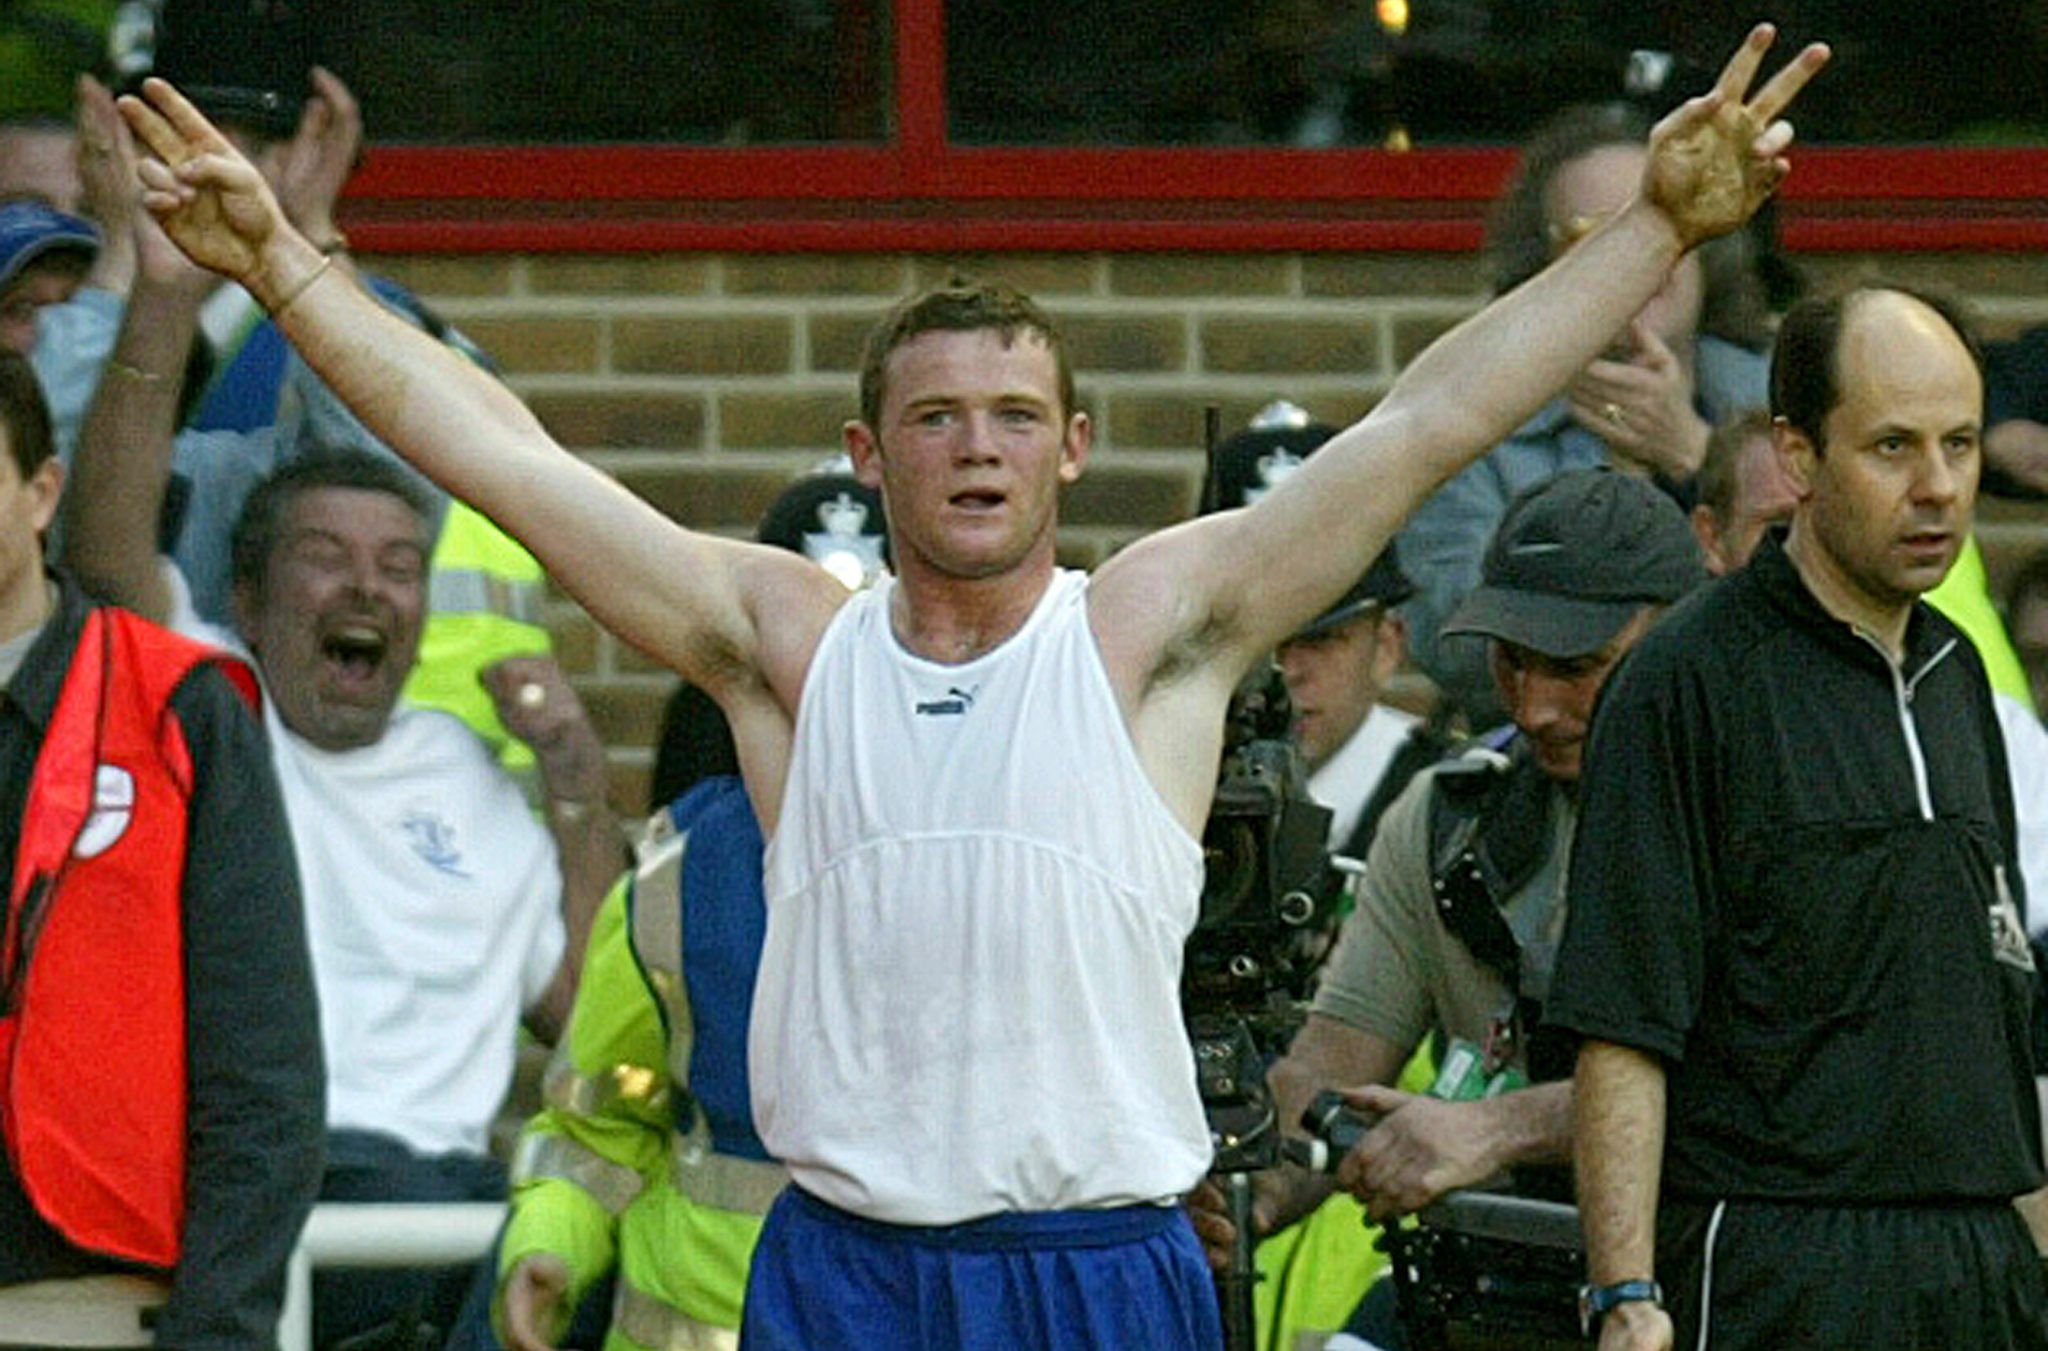 Everton's Wayne Rooney celebrates scoring against Arsenal during their
English premier league match at Highbury in London, March 23, 2003. NO
ONLINE/INTERNET USAGE WITHOUT FAPL LICENCE. FOR DETAILS SEE
WWW.FAPLWEB.COM. REUTERS/Kieran Doherty

KD/MD/WS